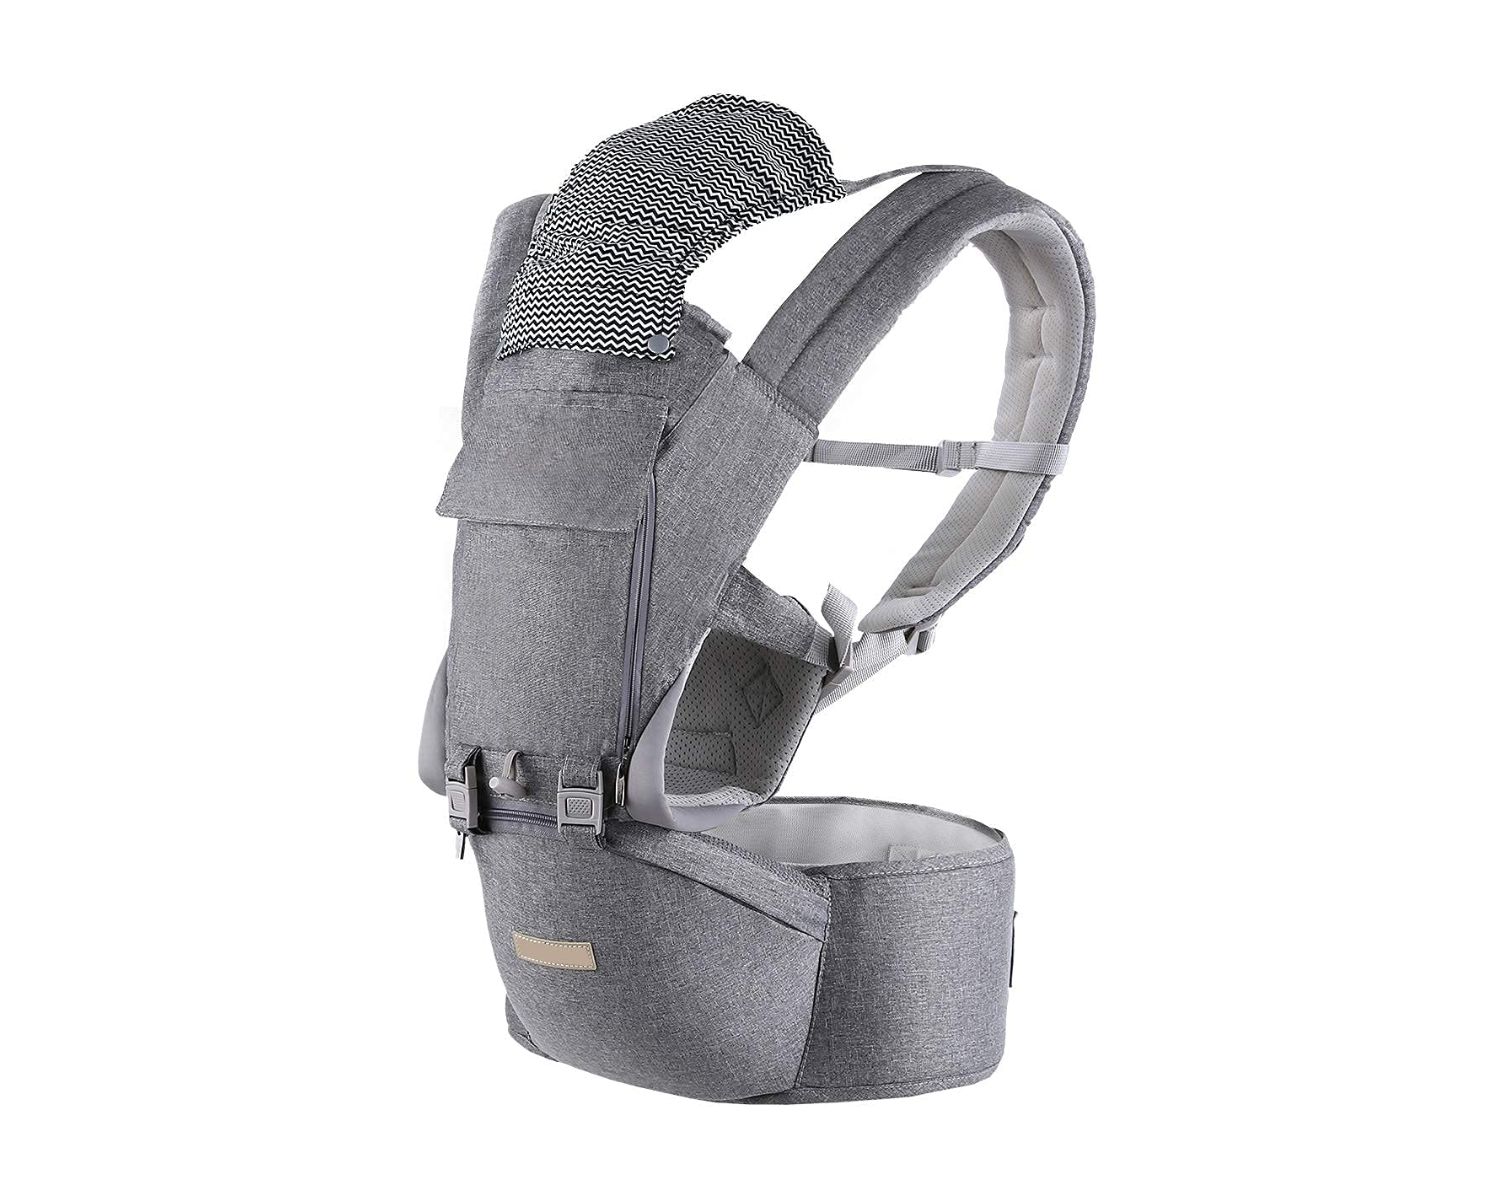 Baby Carrier Review: Find the Perfect Fit for Your Little One